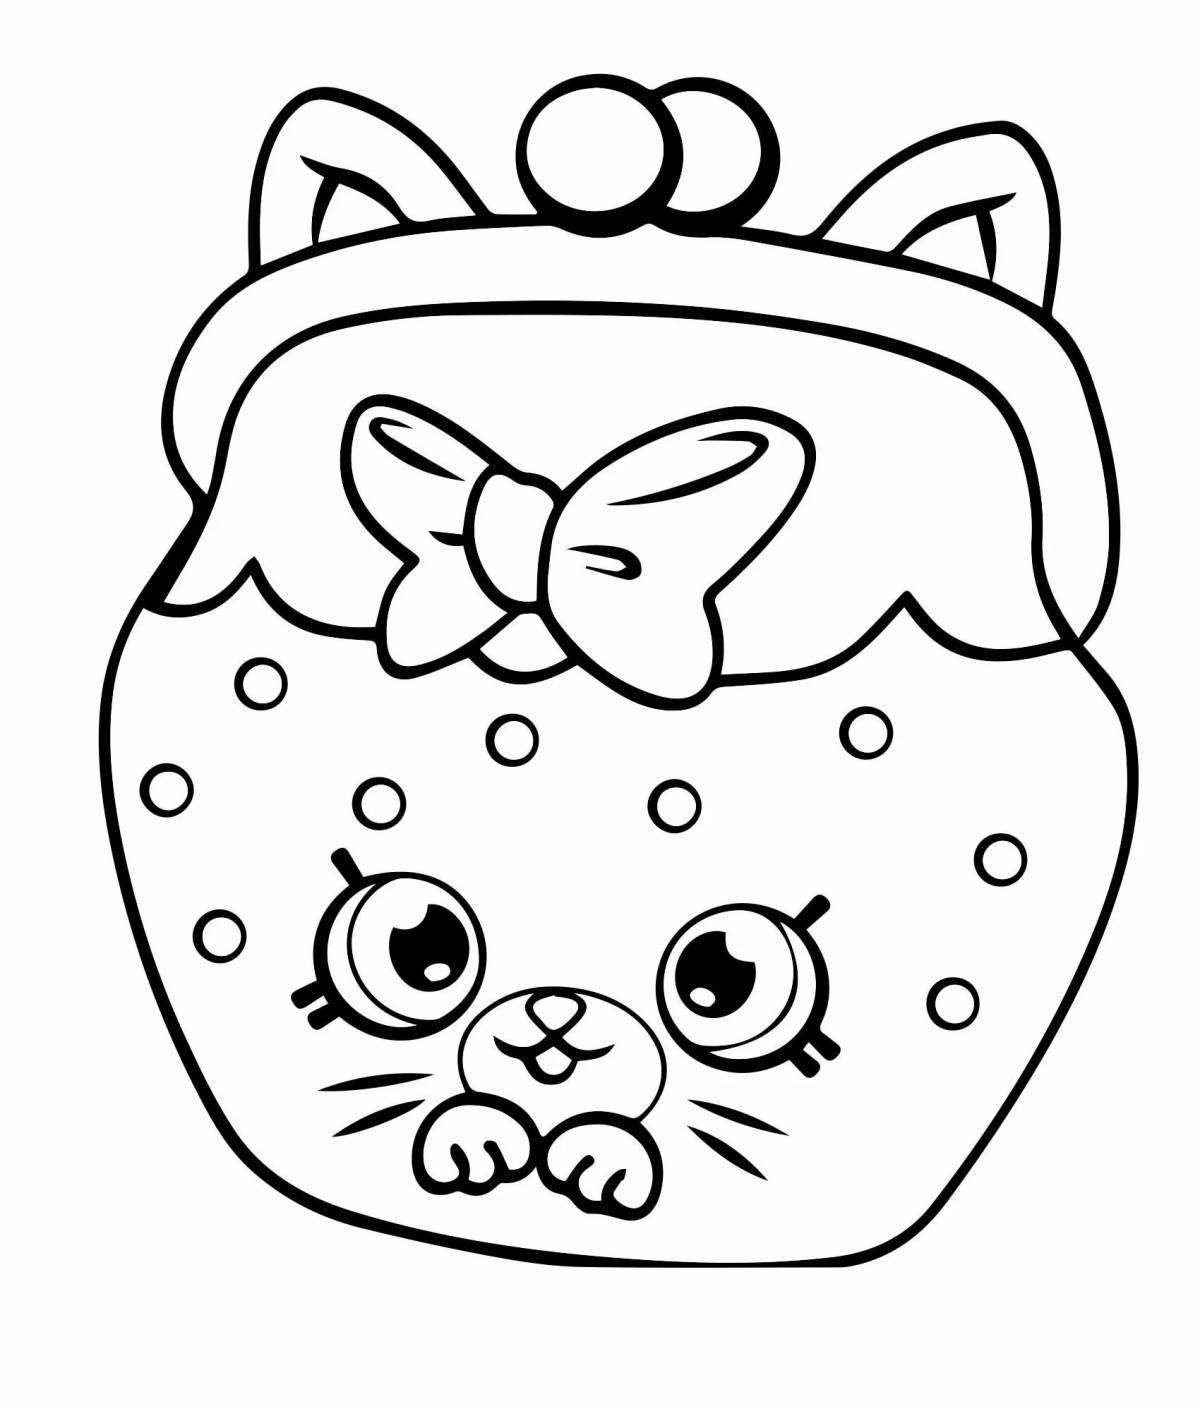 Colorful shopinks coloring page